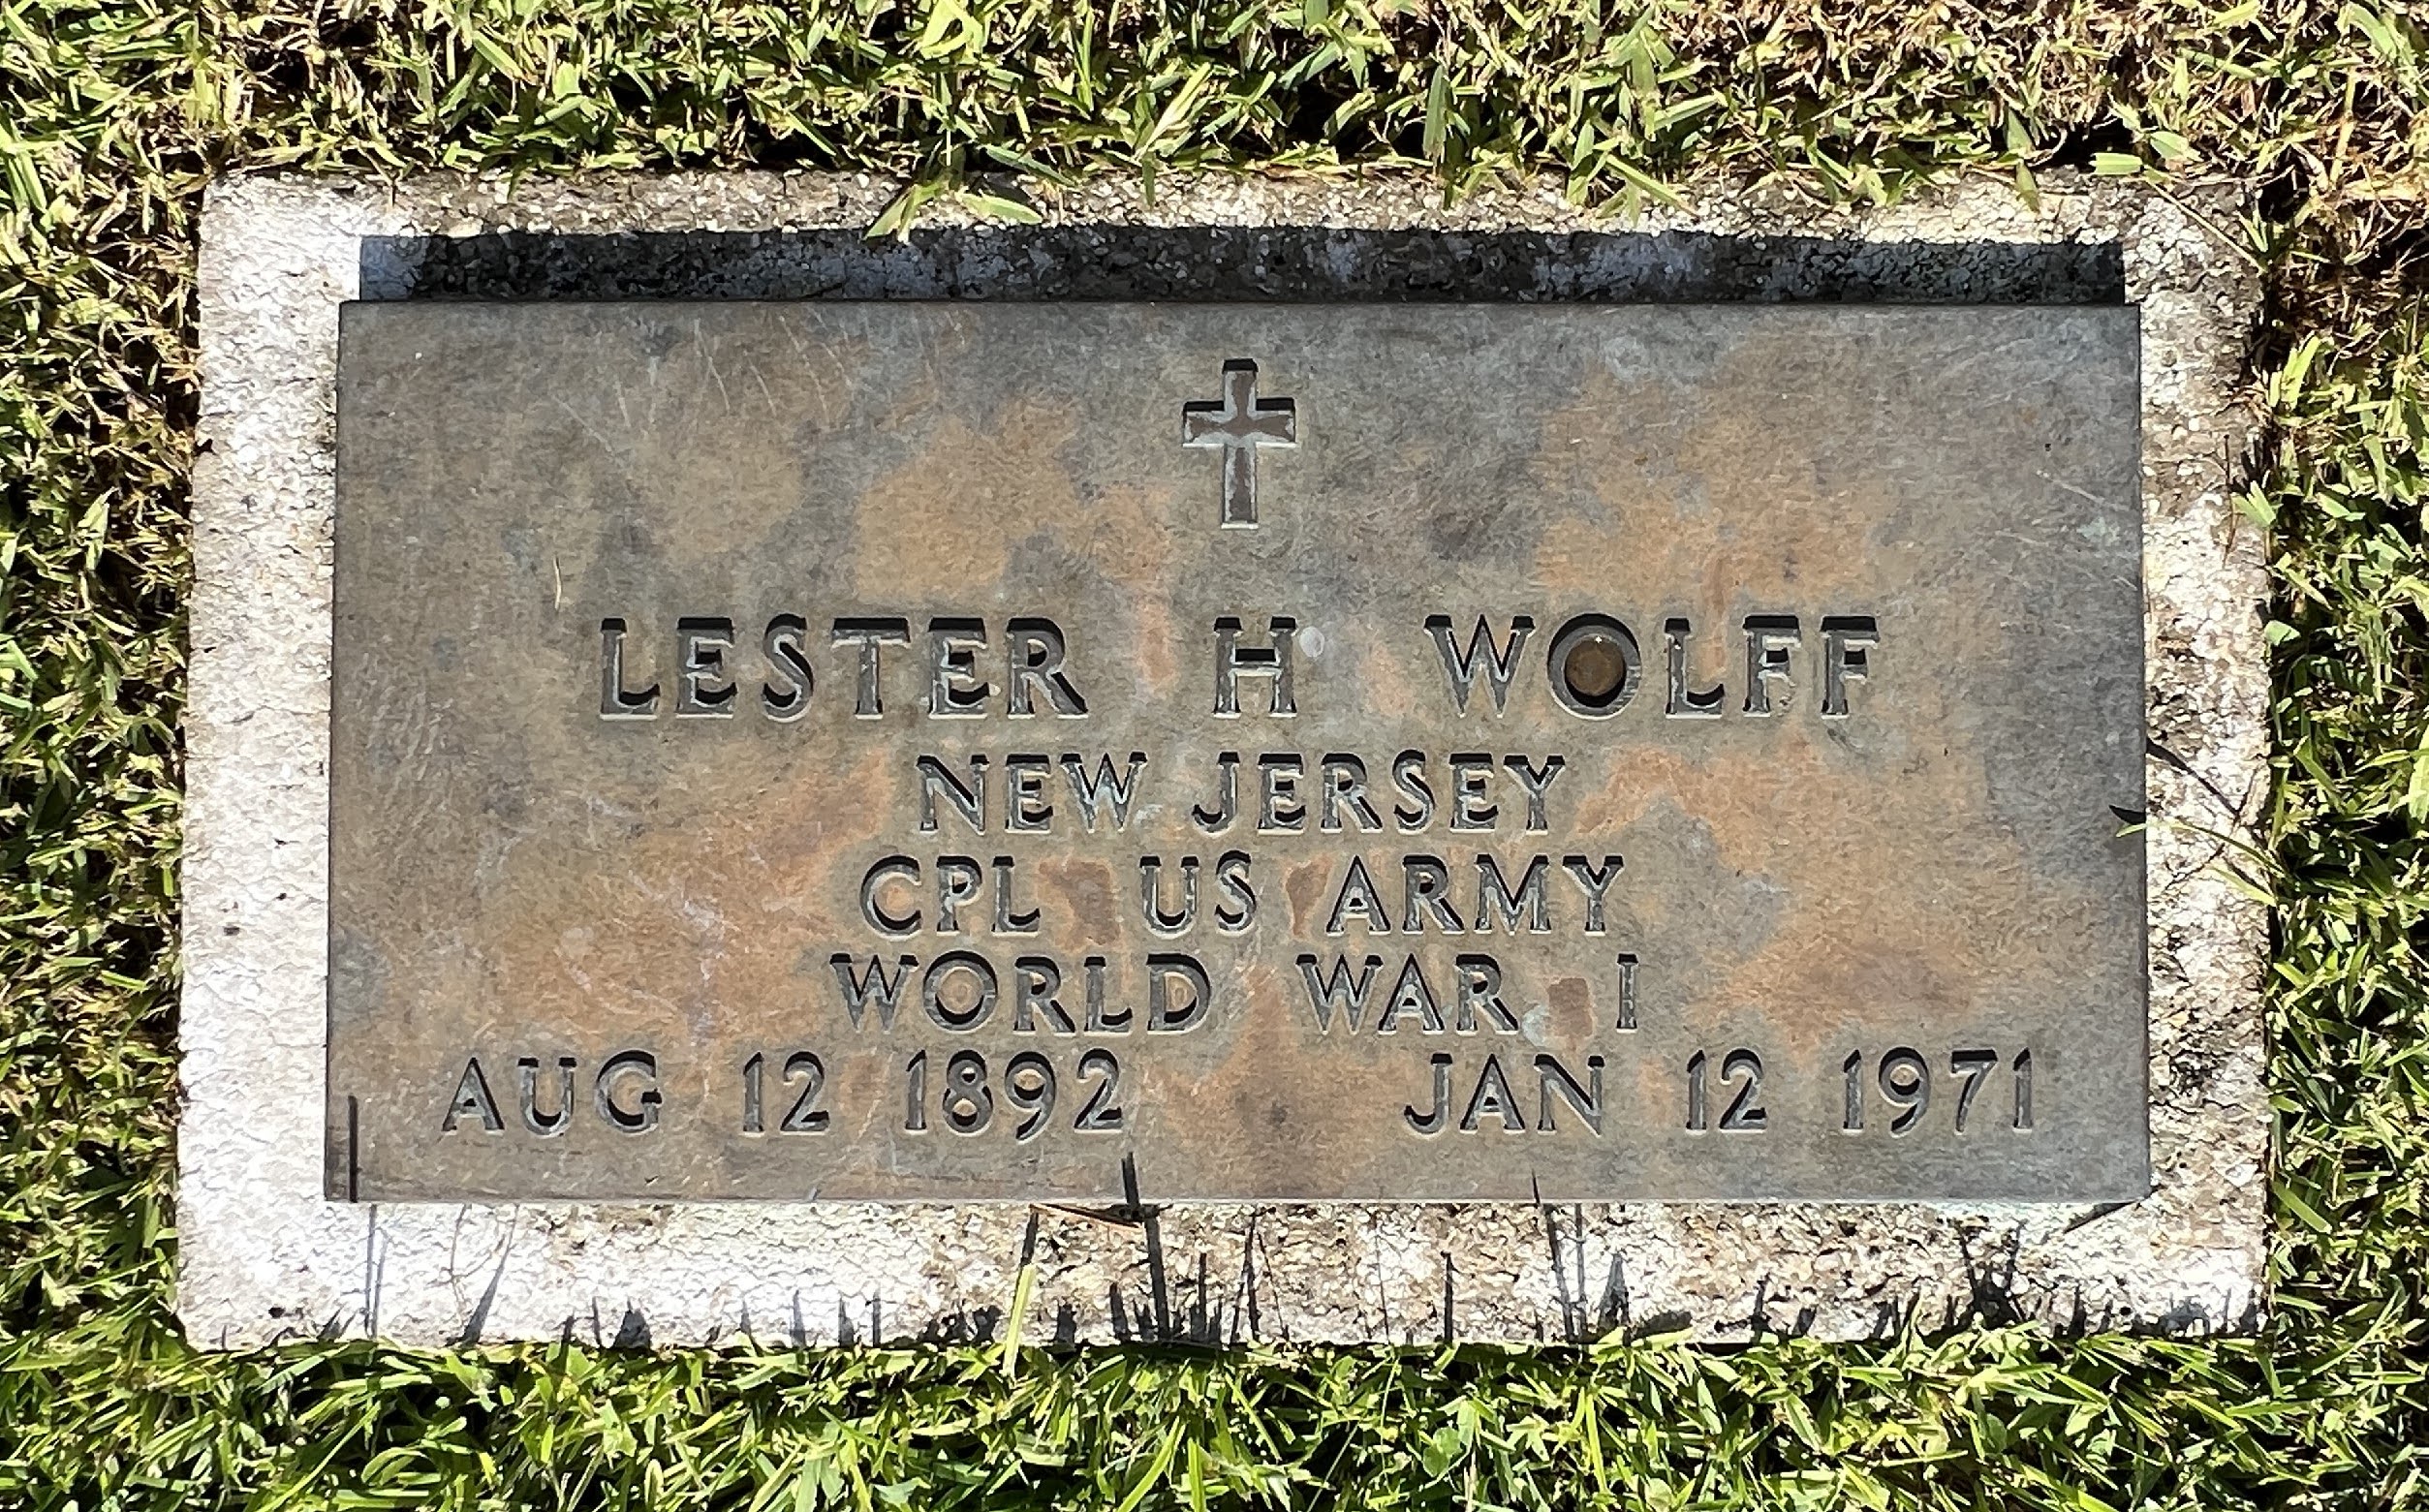 Corp Lester H Wolff